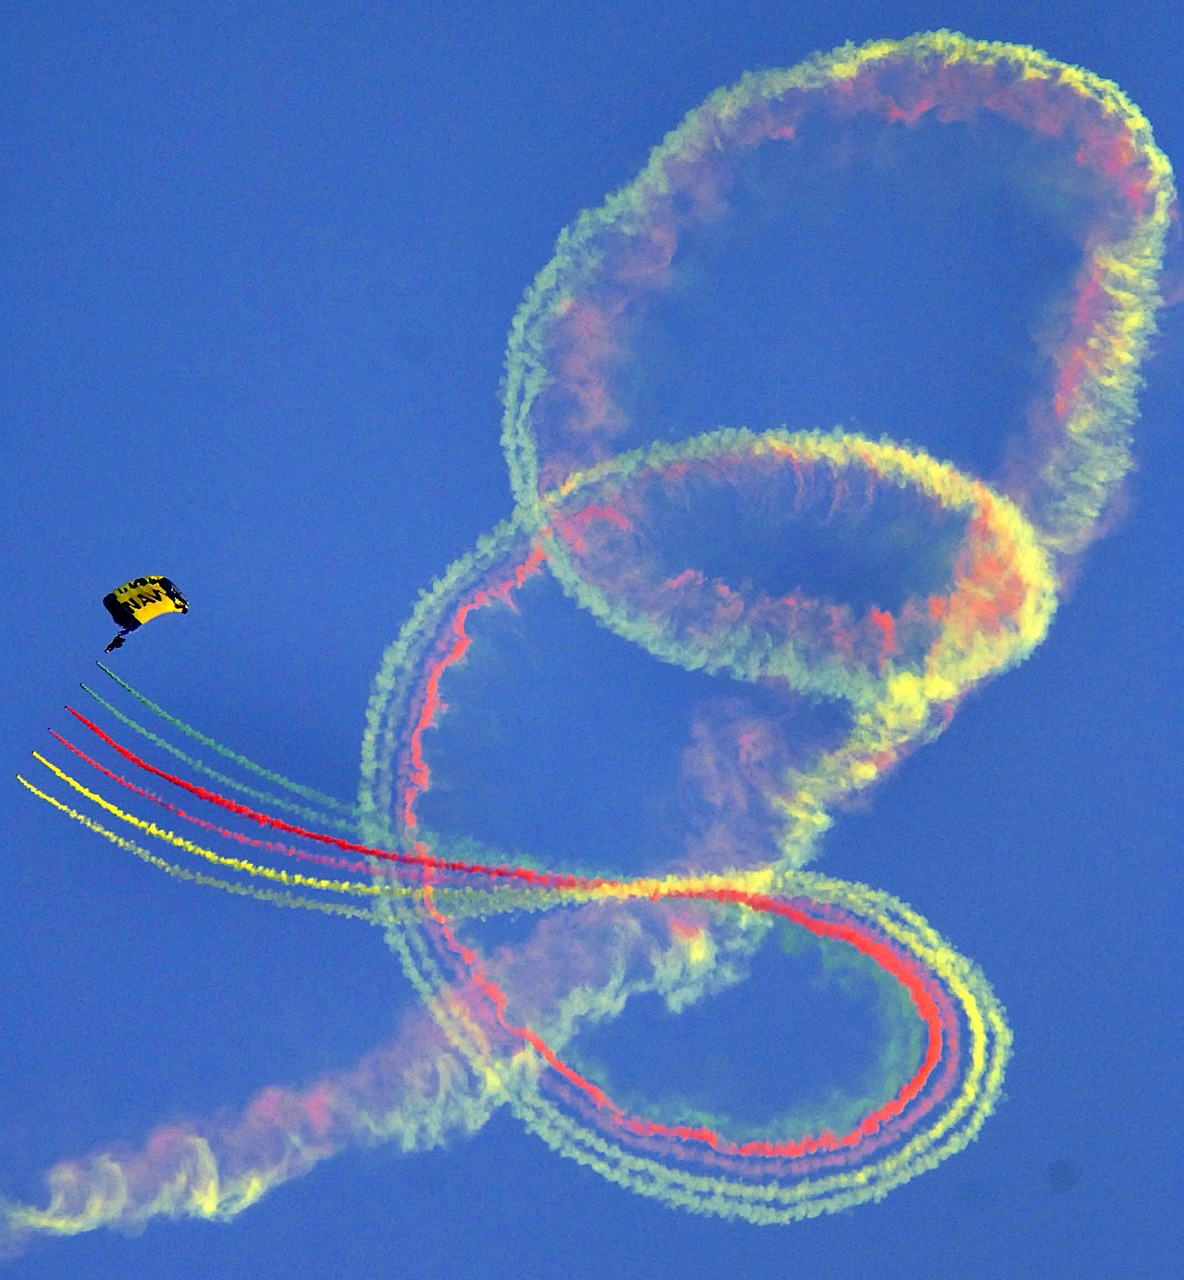 parachute sky diving demonstration free photo